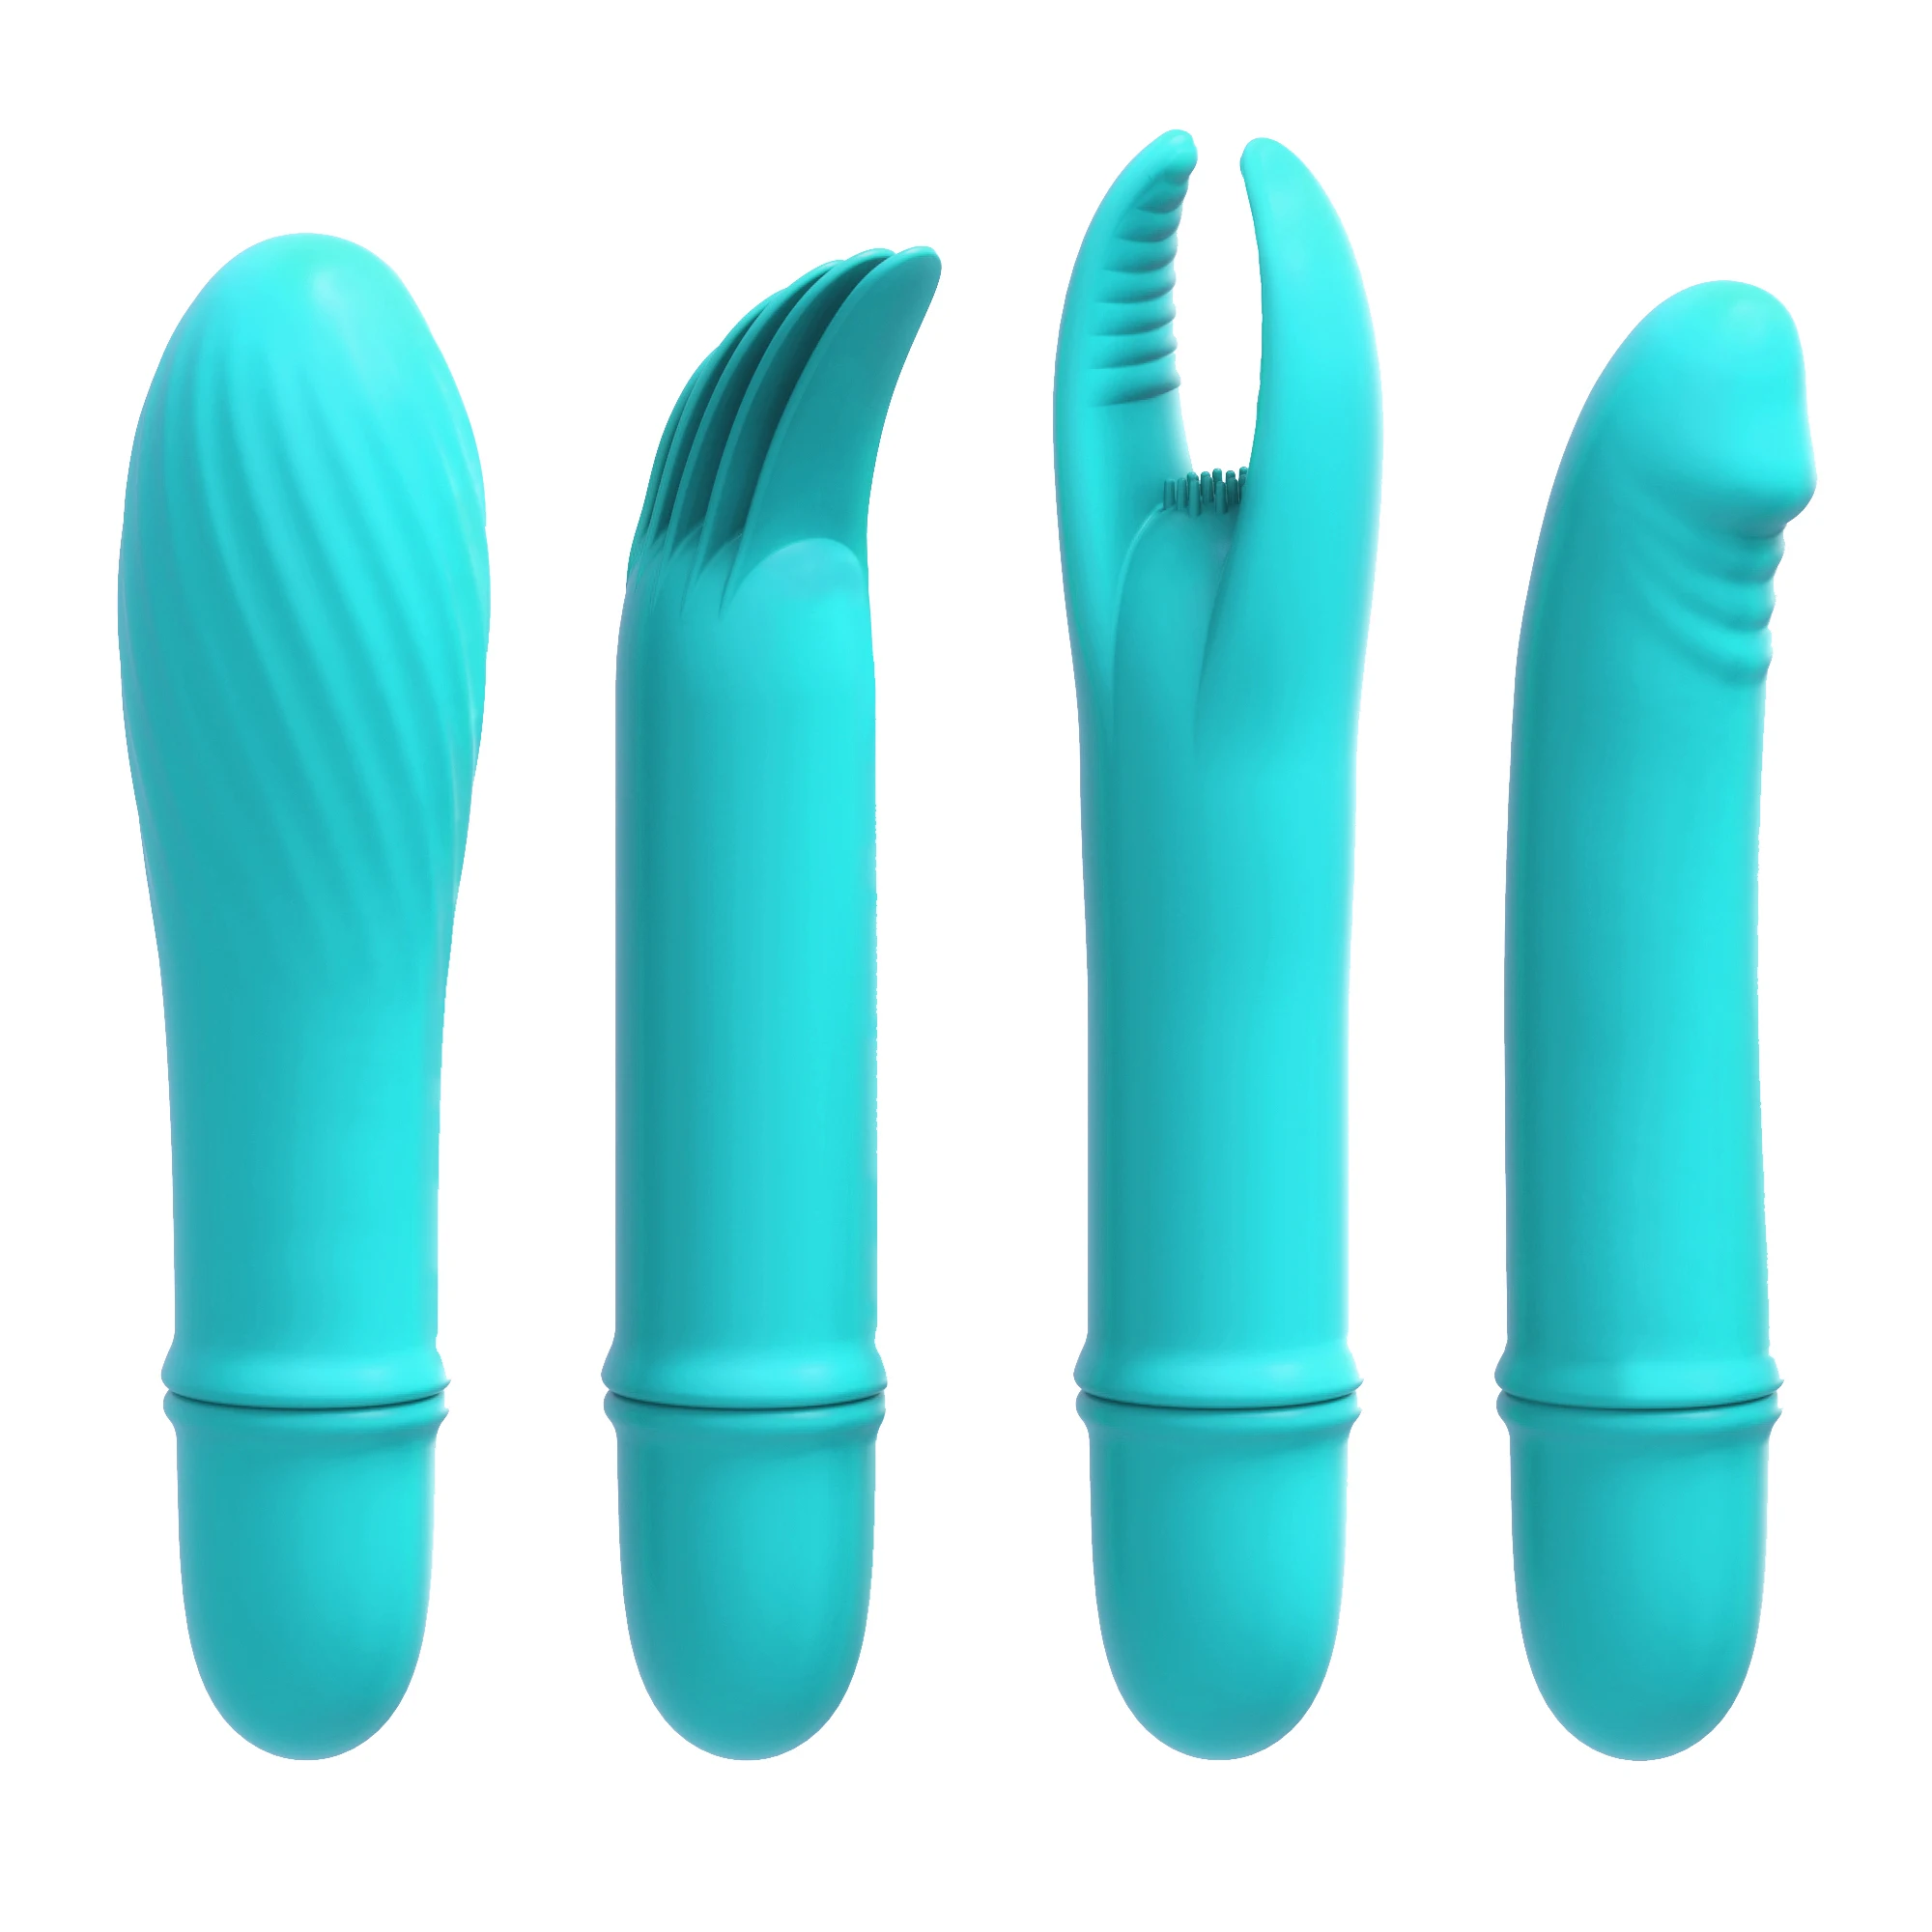 Dingye New Arrival Silicone Dildo Vibrator 10 Speed Adult Sex Toy Sex